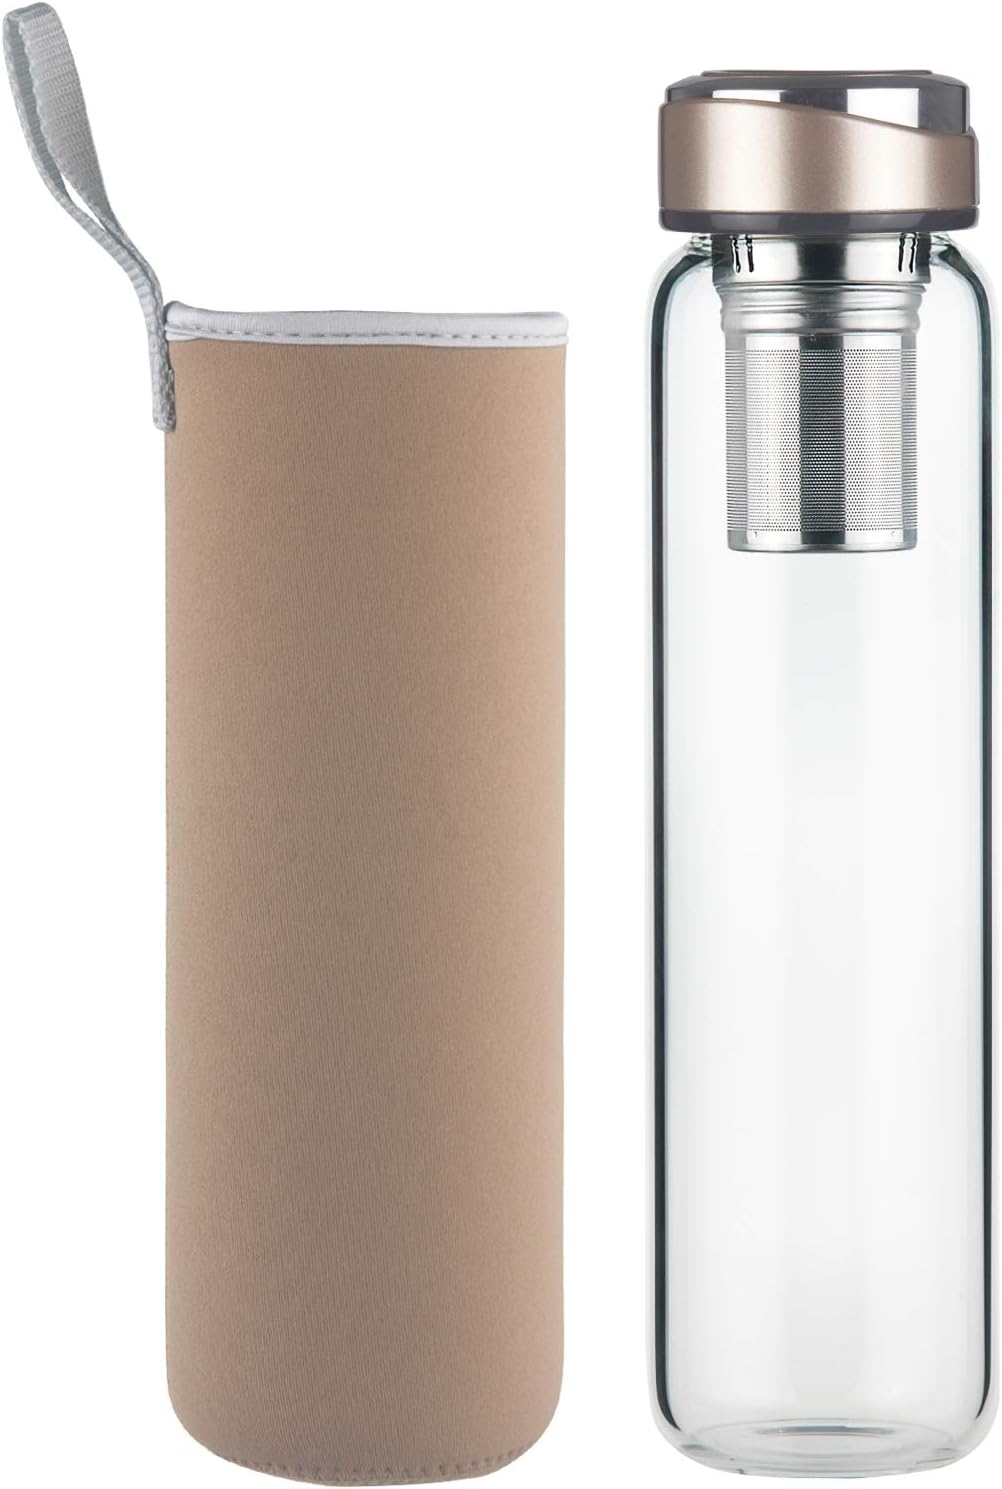 DEARRAY Glass Tea Bottle for Travelling with Stainless Steel Strainer 600 ml / 1000 ml / 1 Litre, Teapot with Filter to Go, Borosilicate Glass Water Bottle with Neoprene Cover and Stylish Stainless Steel Lid